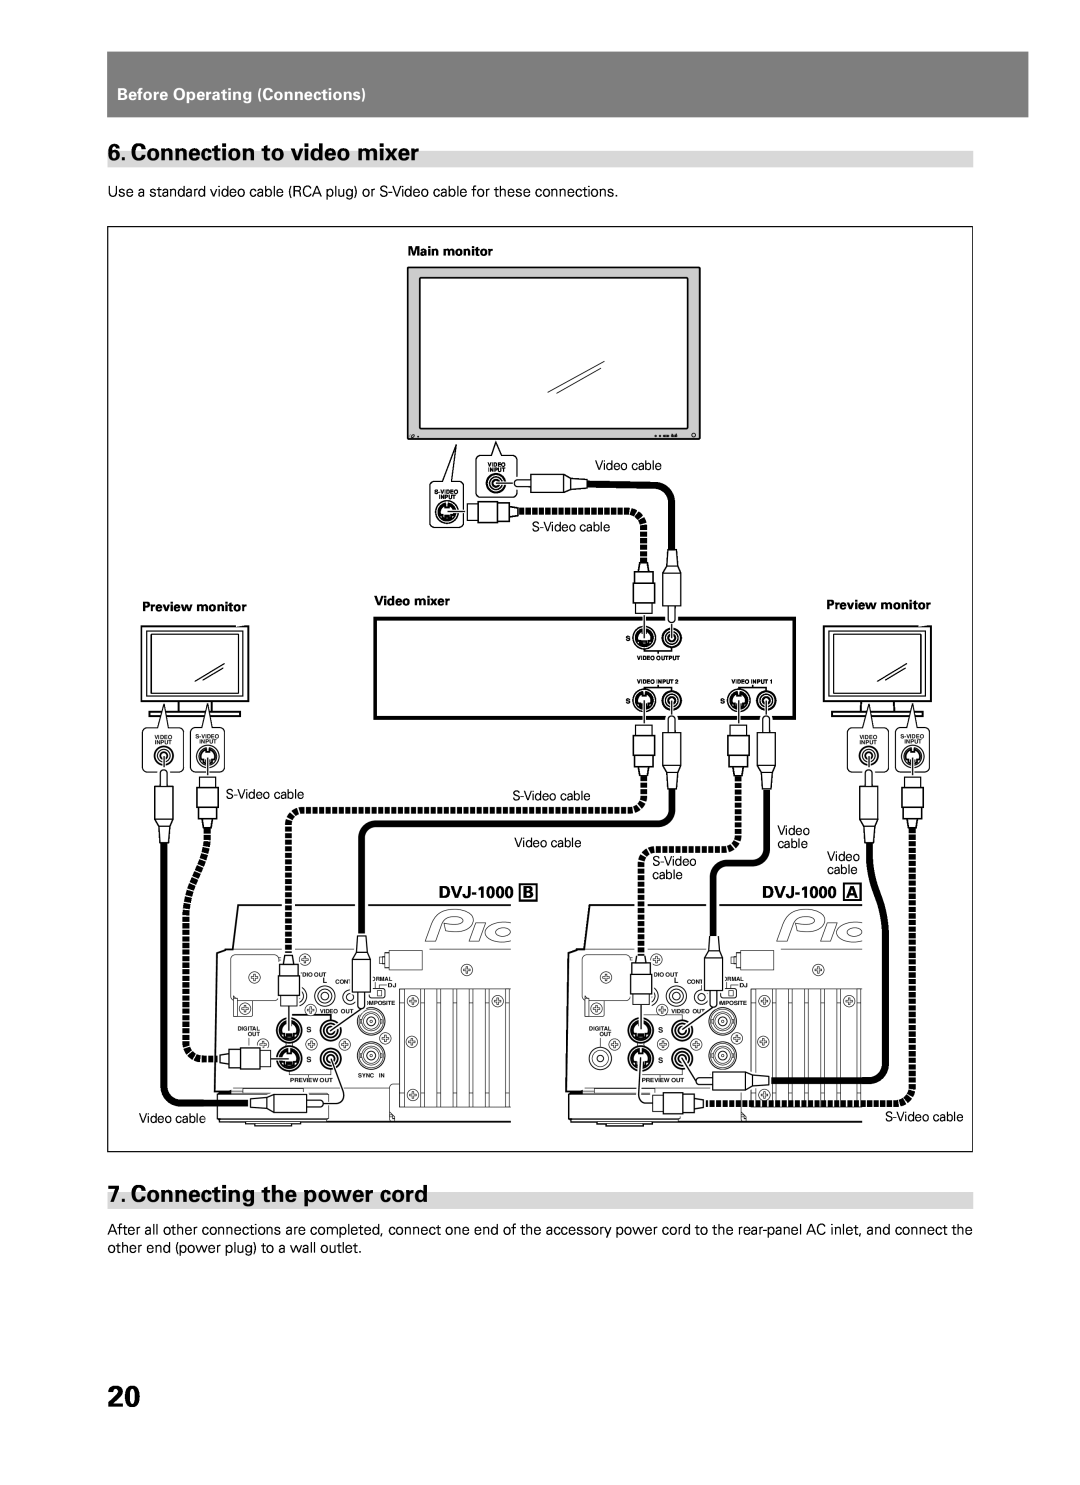 Pioneer manual Connection to video mixer, Connecting the power cord, Before Operating Connections, DVJ-1000B, DVJ-1000A 